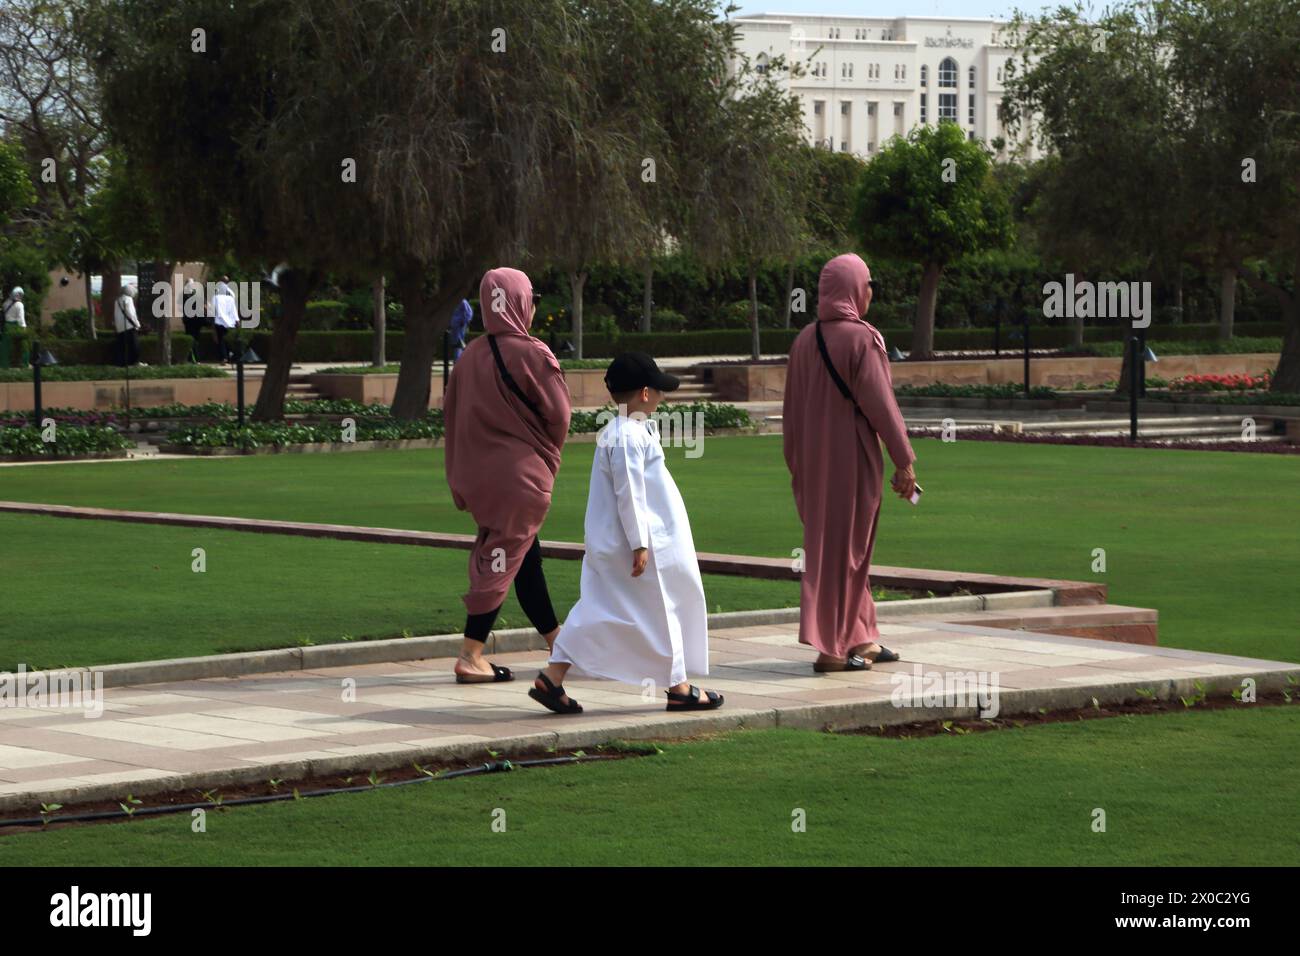 Sultan Qaboos Grand Mosque Visitors in the Gardens Muscat Oman Stock Photo